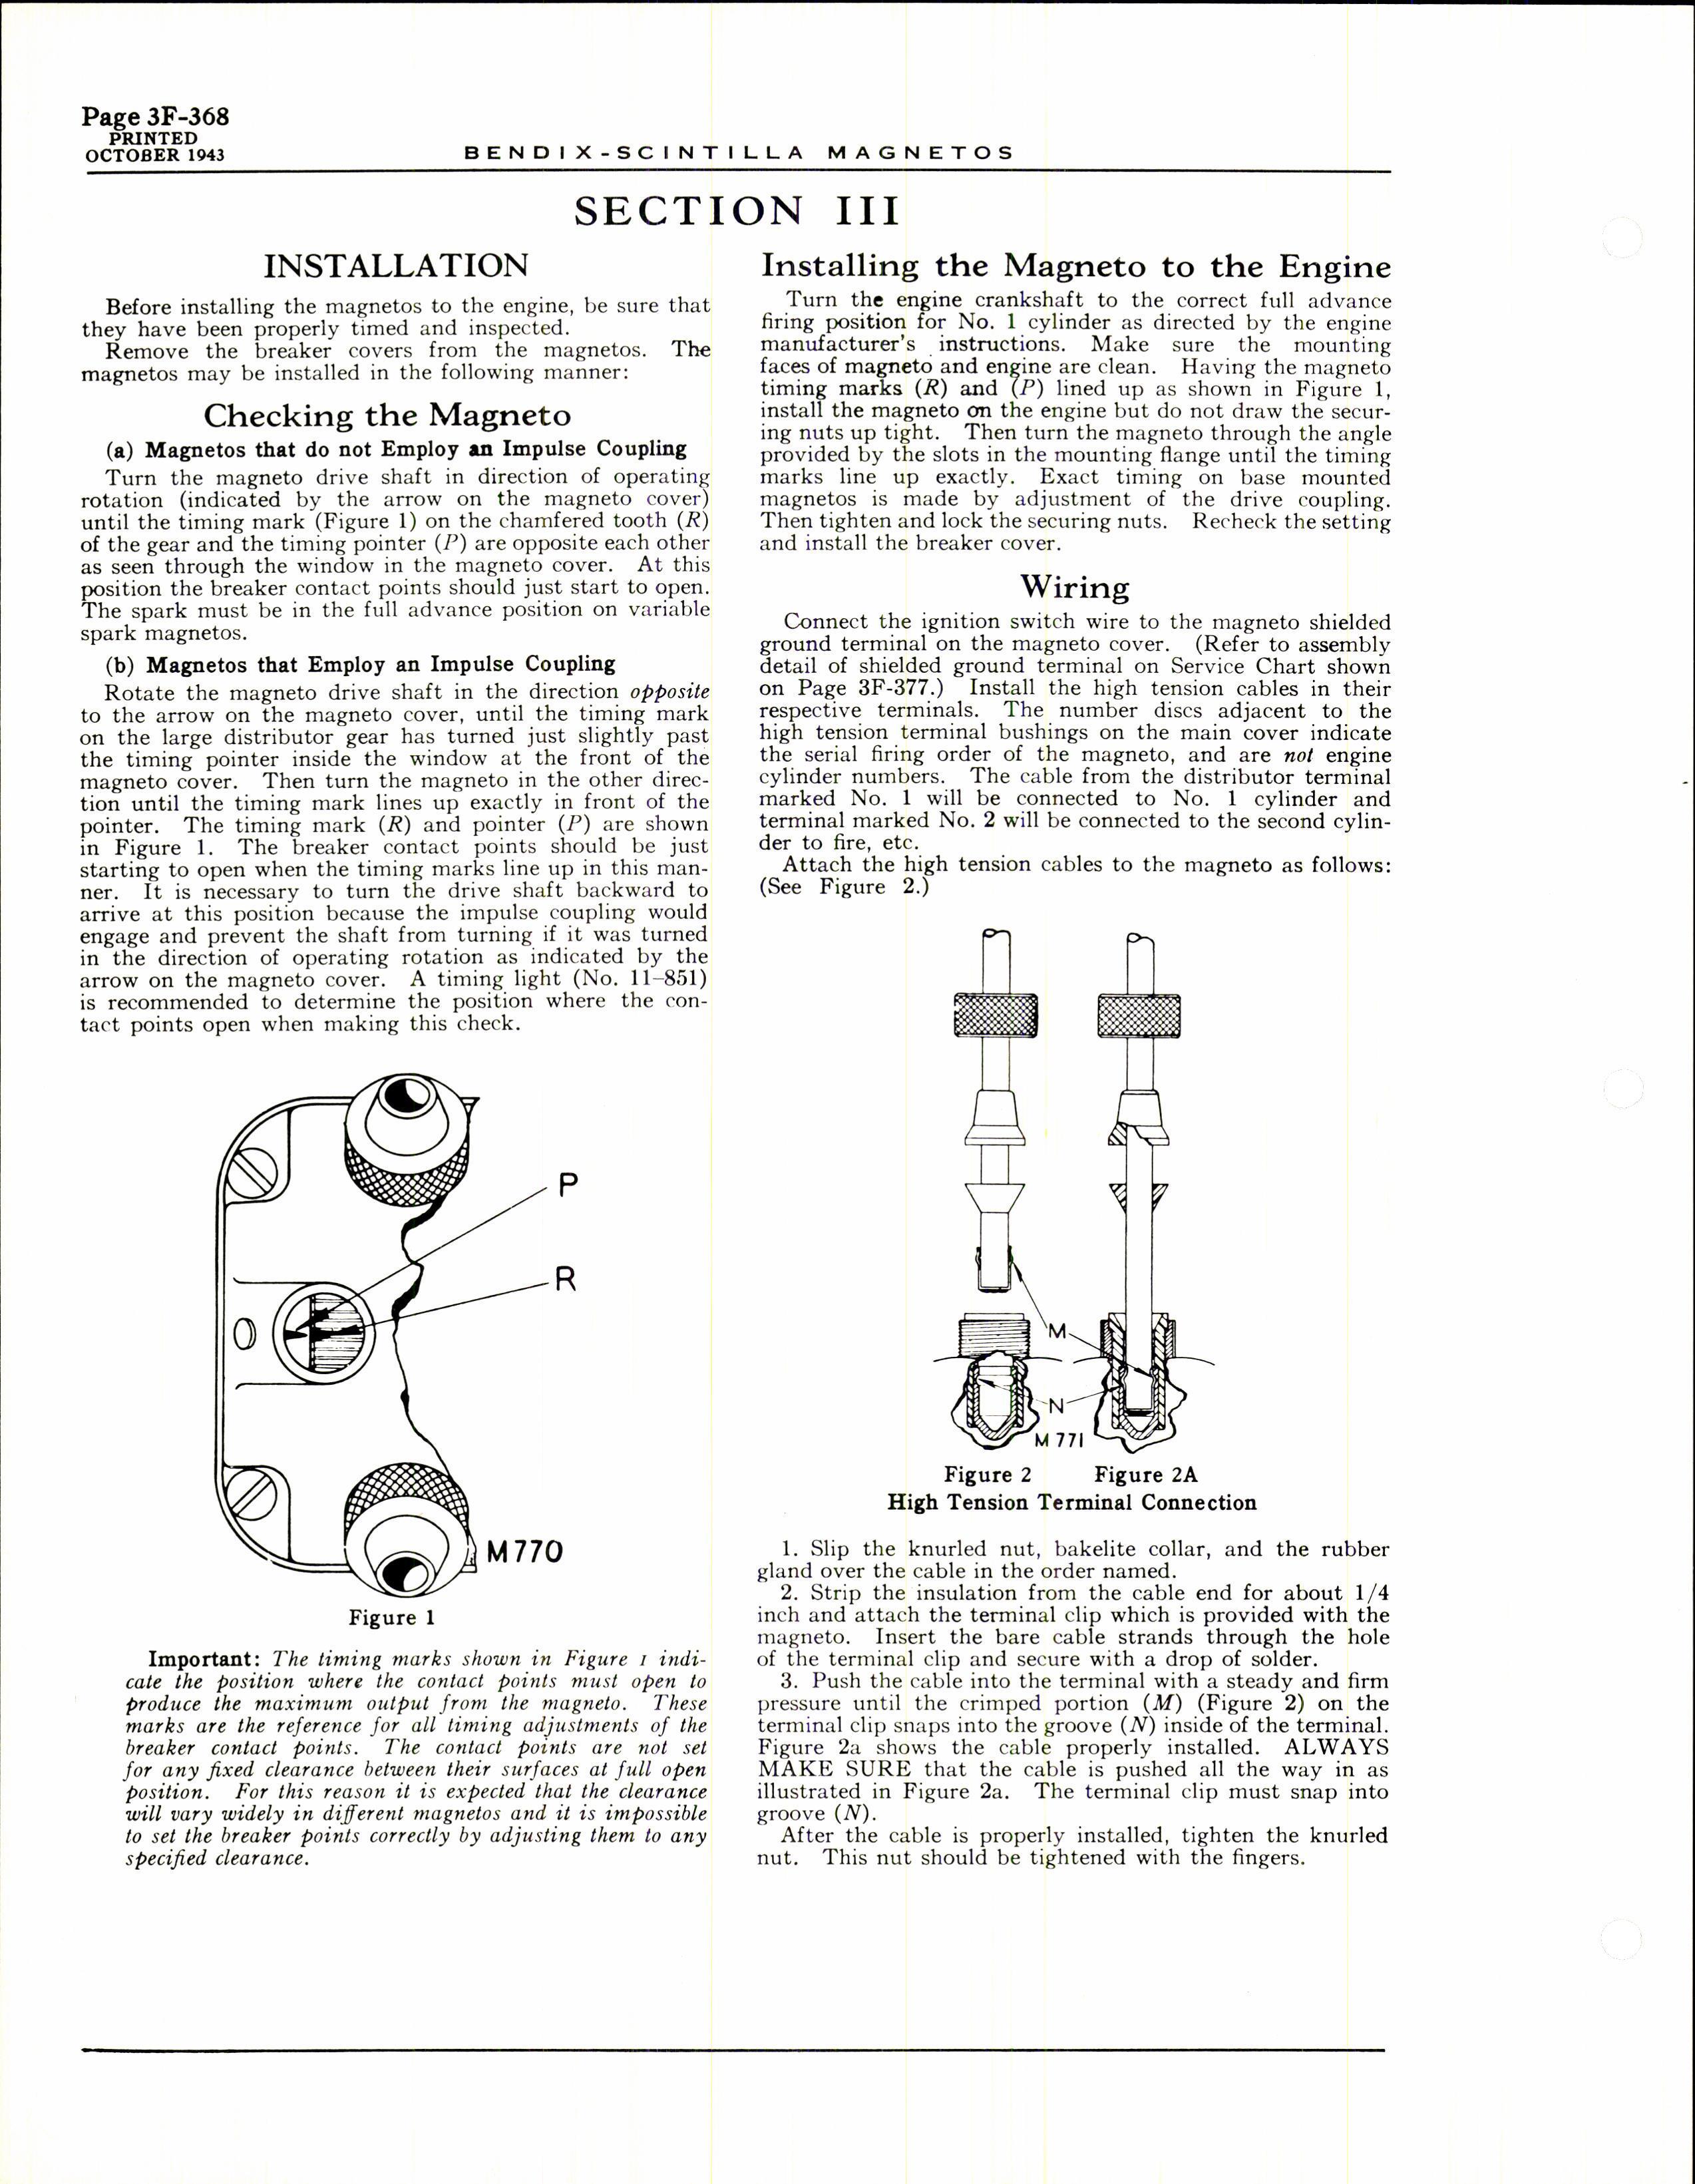 Sample page 4 from AirCorps Library document: Service Instructions for Bendix-Scintilla Aircraft Magnetos Types SB and SF